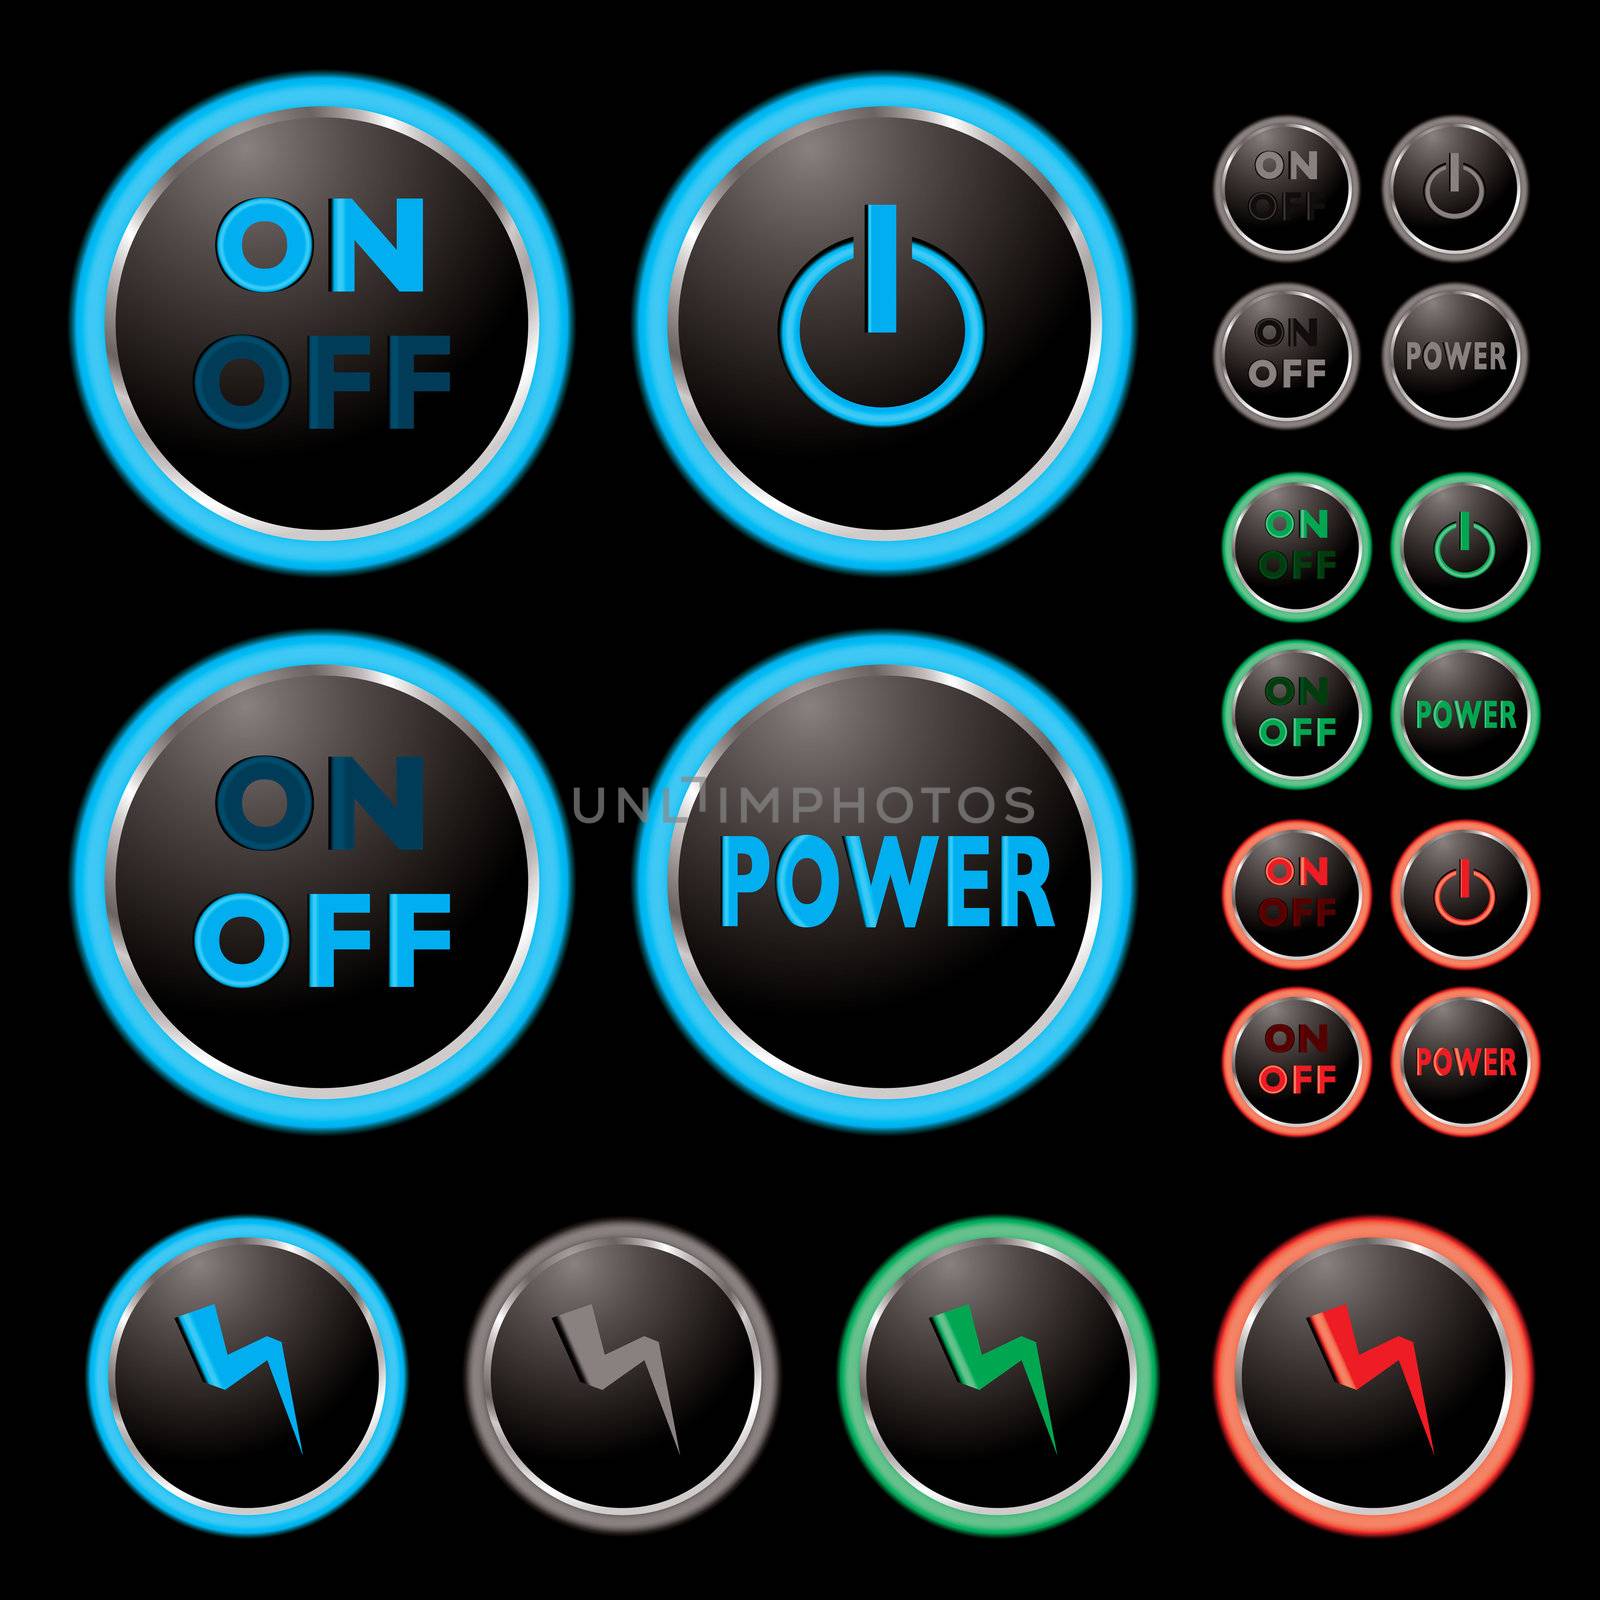 Power buttons with neon surround and colour variations